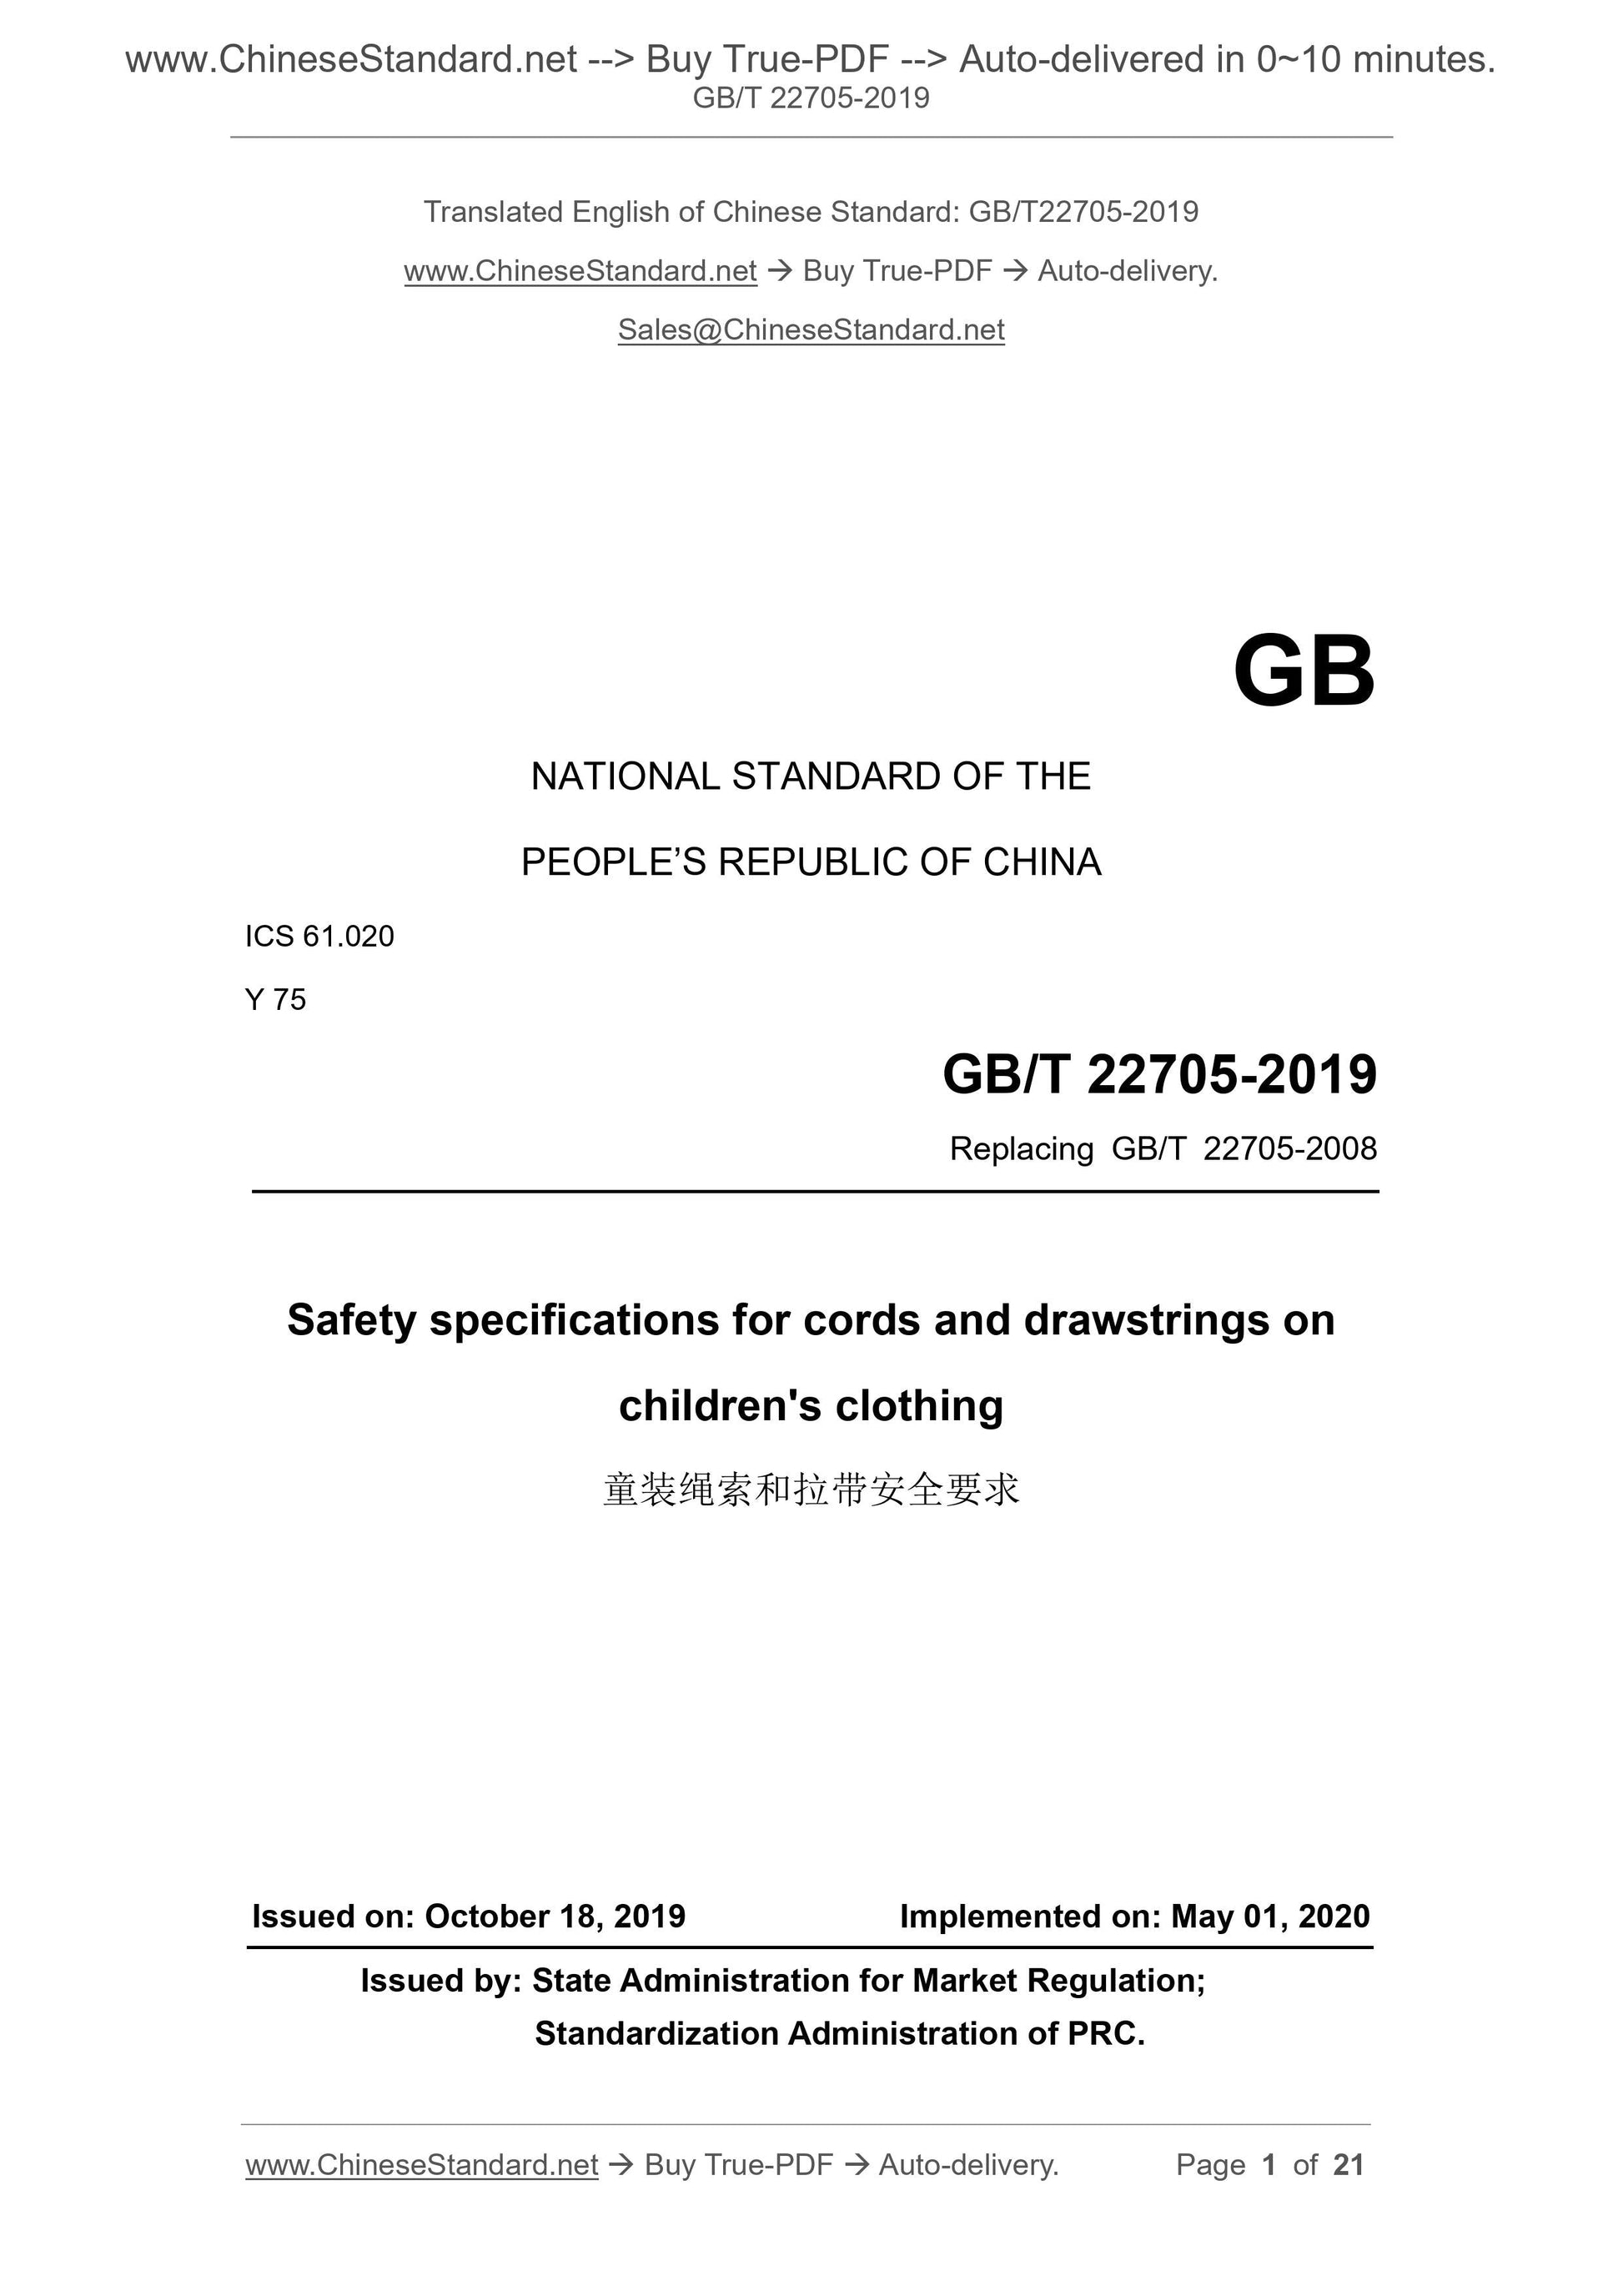 GB/T 22705-2019 Page 1